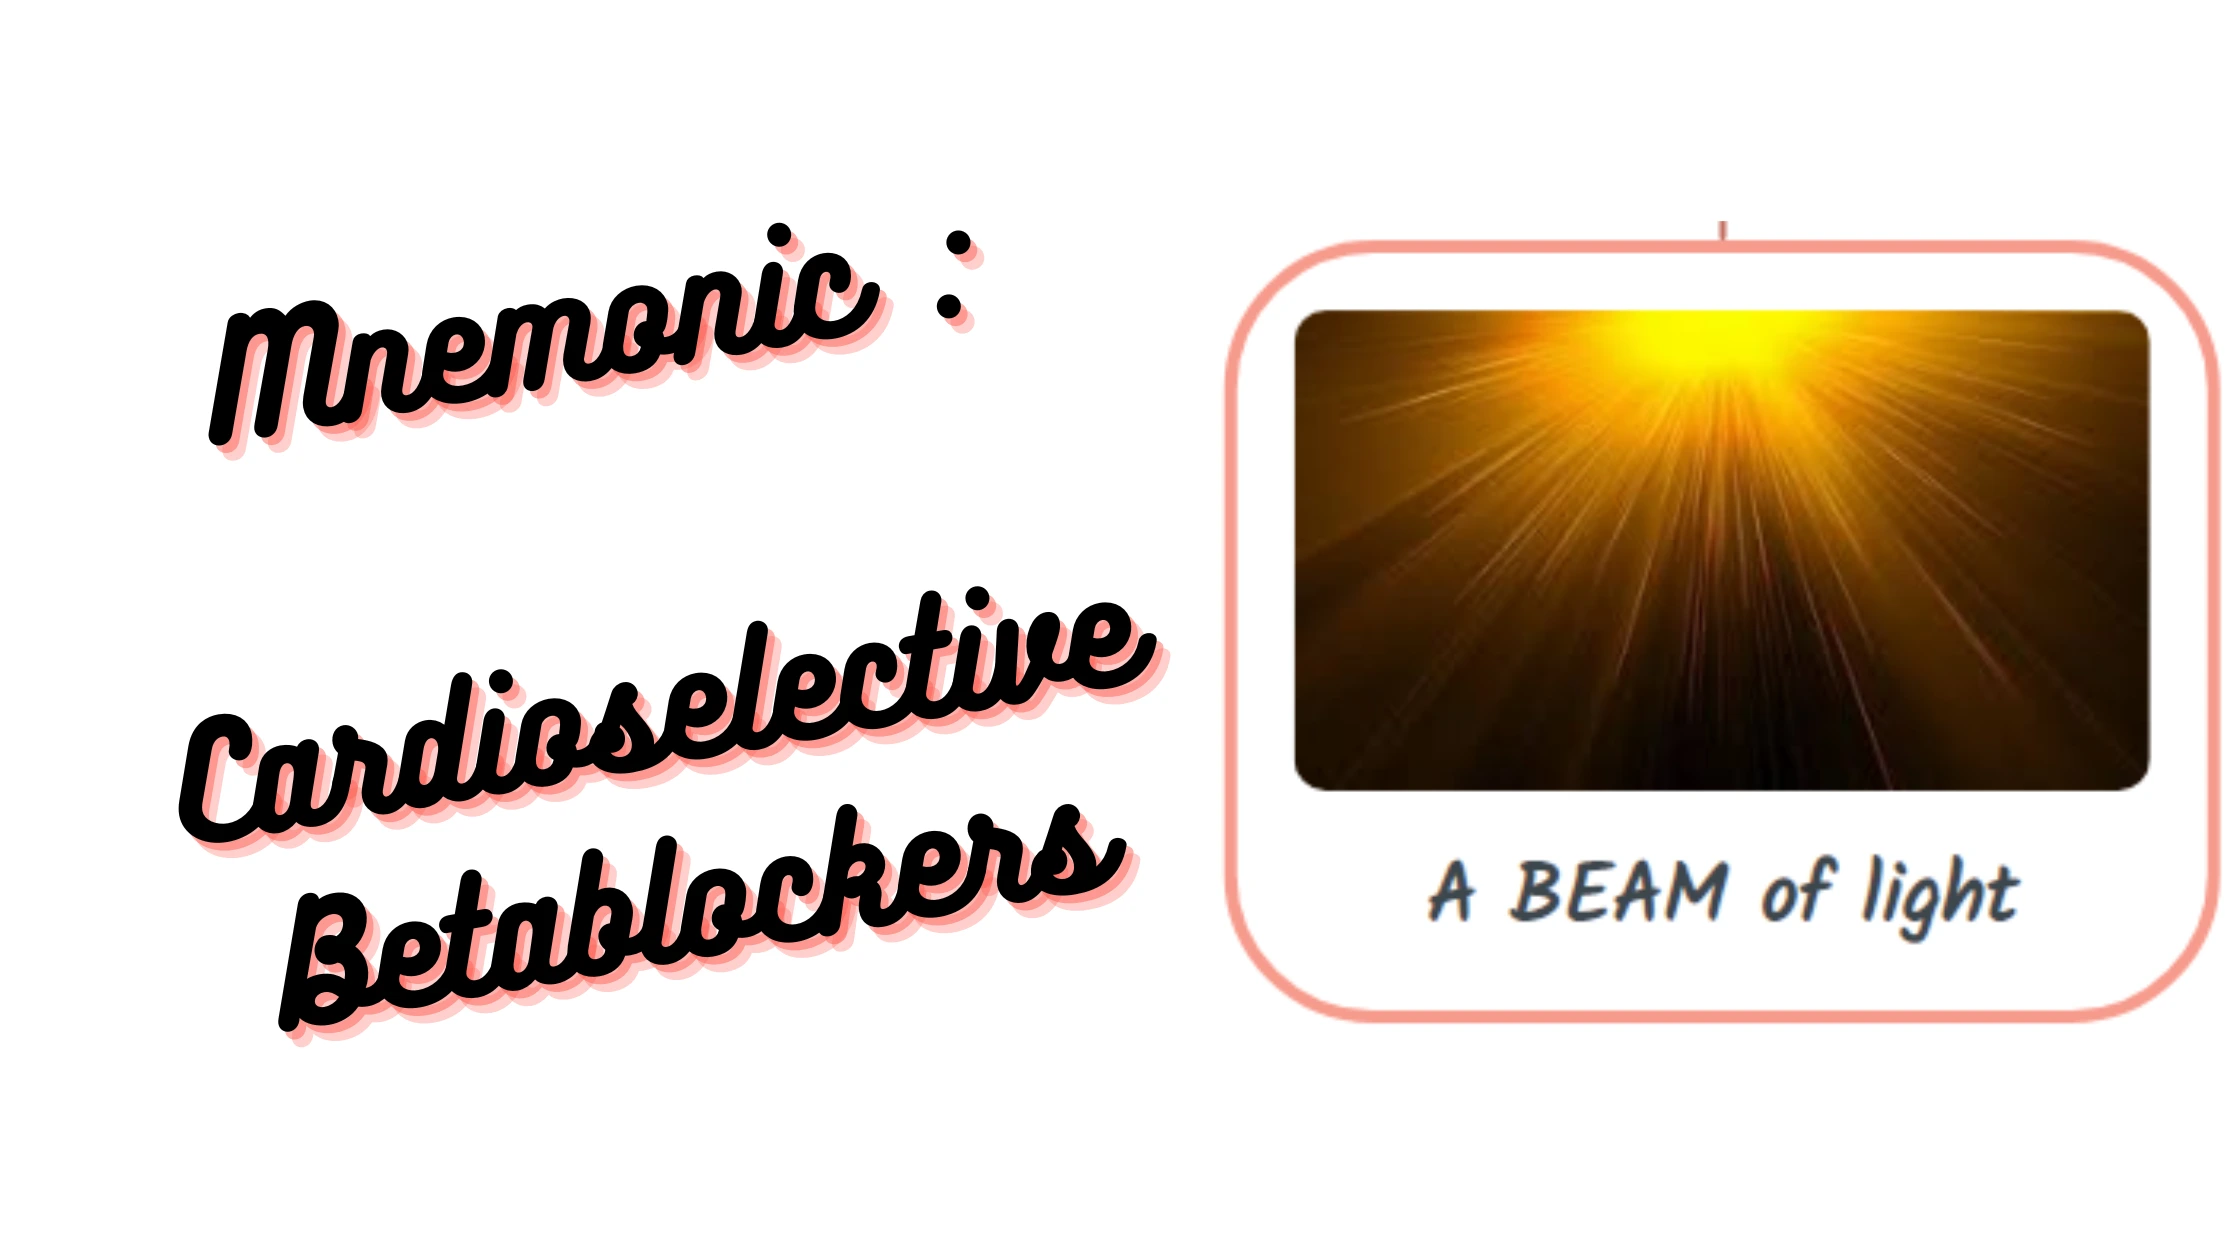 You are currently viewing [Very Cool] Mnemonic : Cardioselective Betablockers